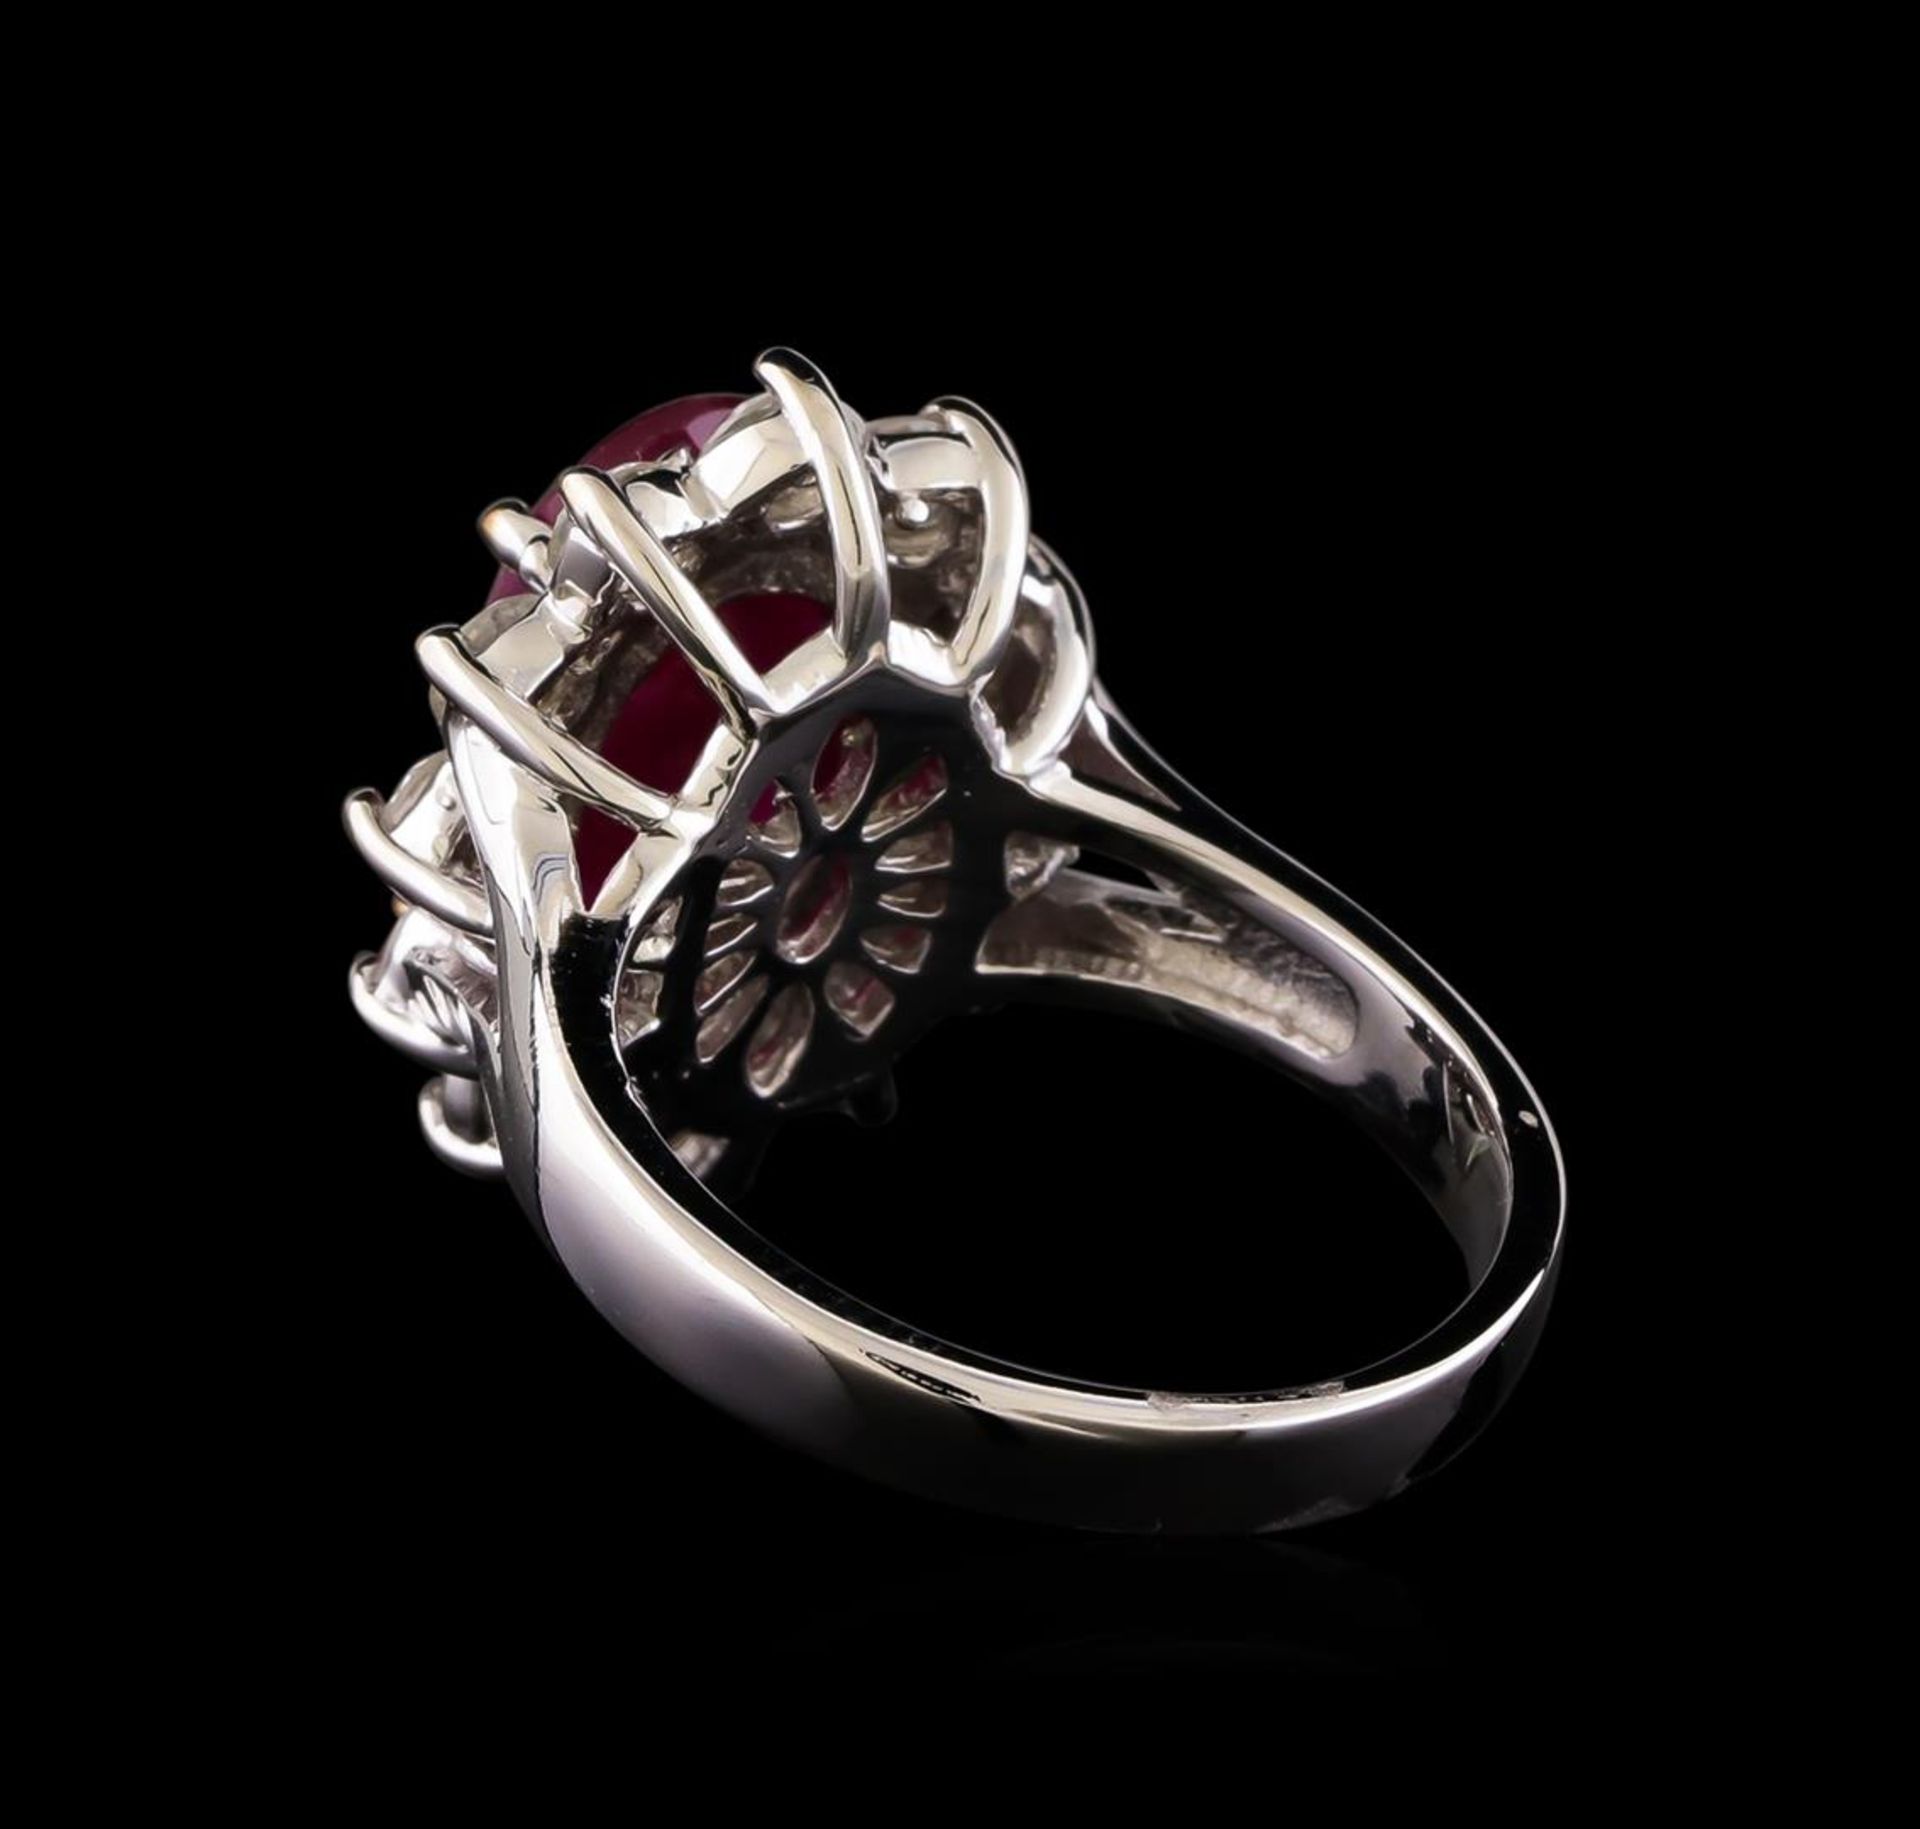 GIA Cert 4.09 ctw Ruby and Diamond Ring - 14KT White Gold - Image 3 of 6